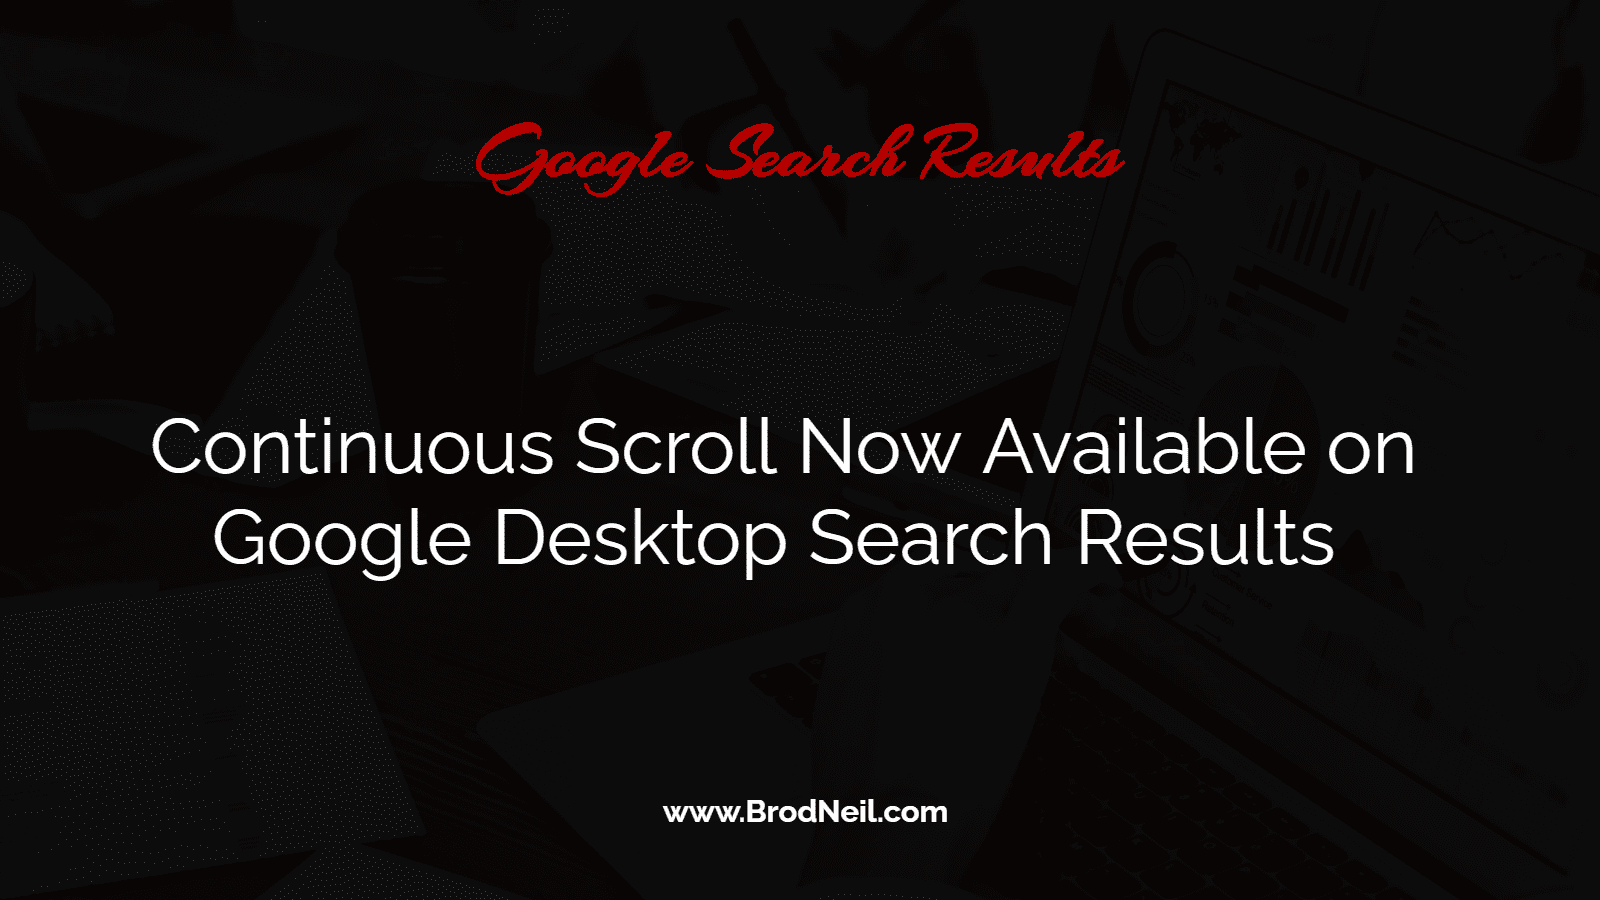 Continuous Scroll Now Available on Google Desktop Search Results